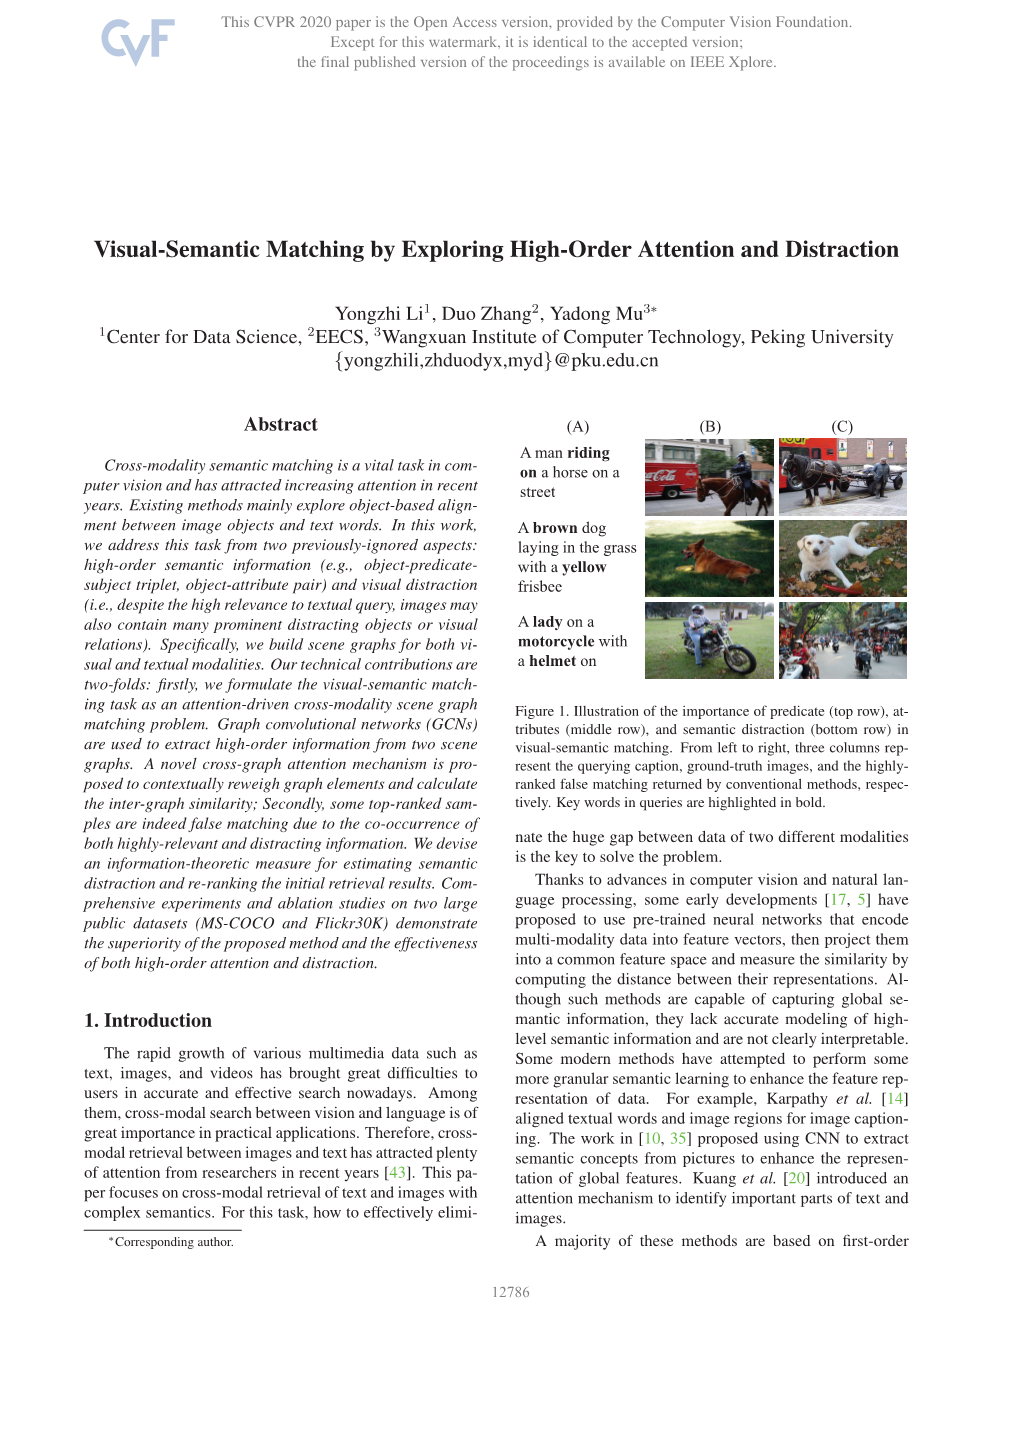 Visual-Semantic Matching by Exploring High-Order Attention and Distraction